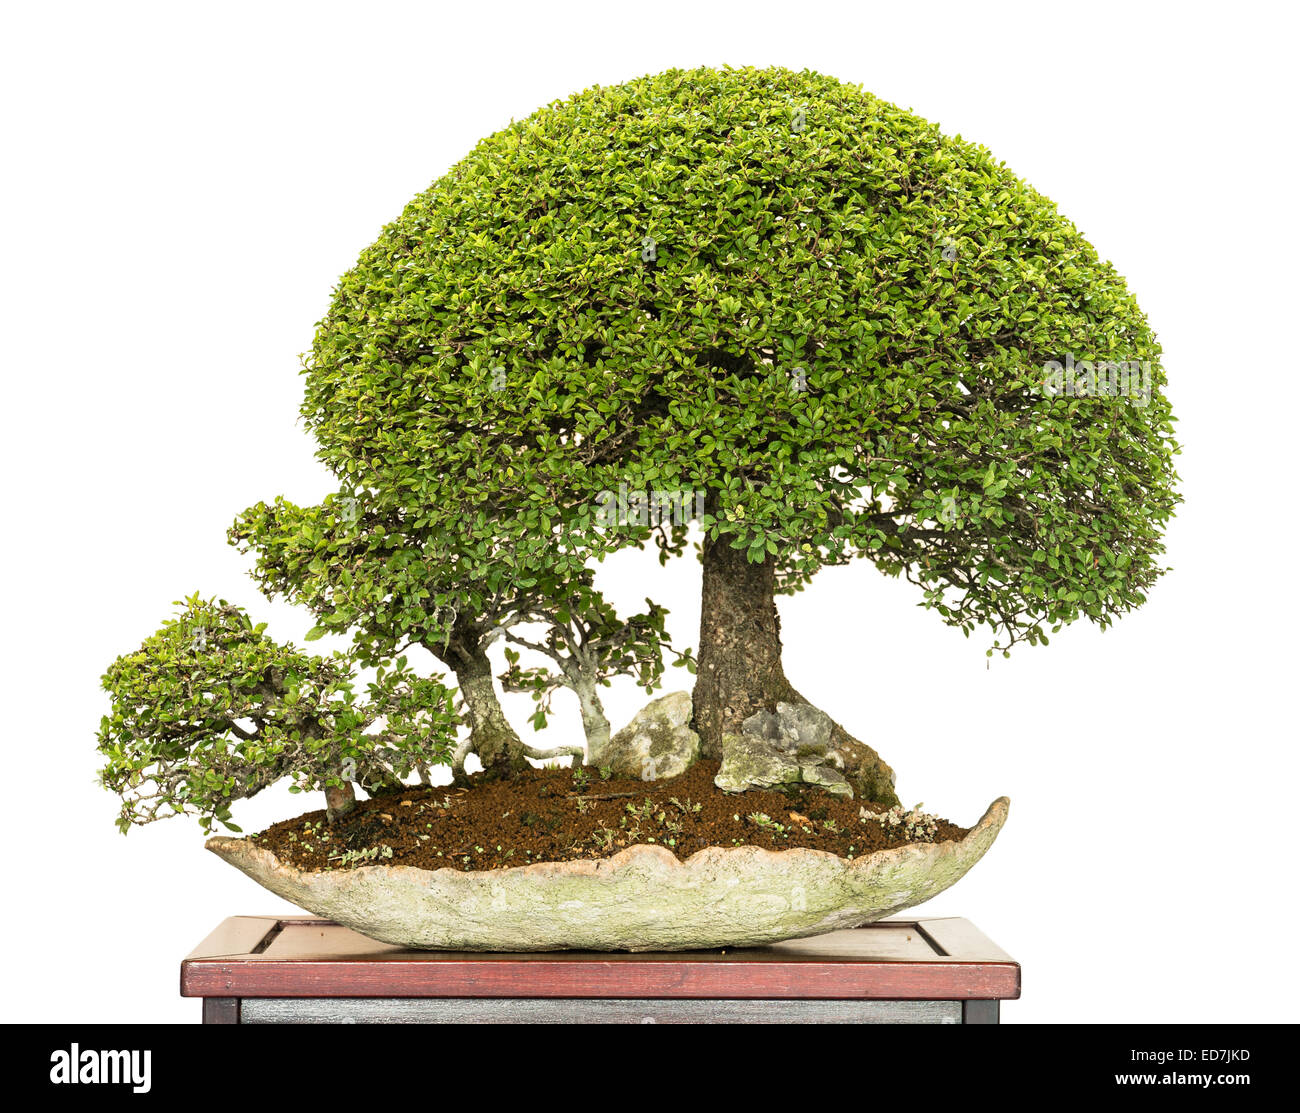 Bonsai forest with chinese elm (Ulmus parvifolia) trees Stock Photo